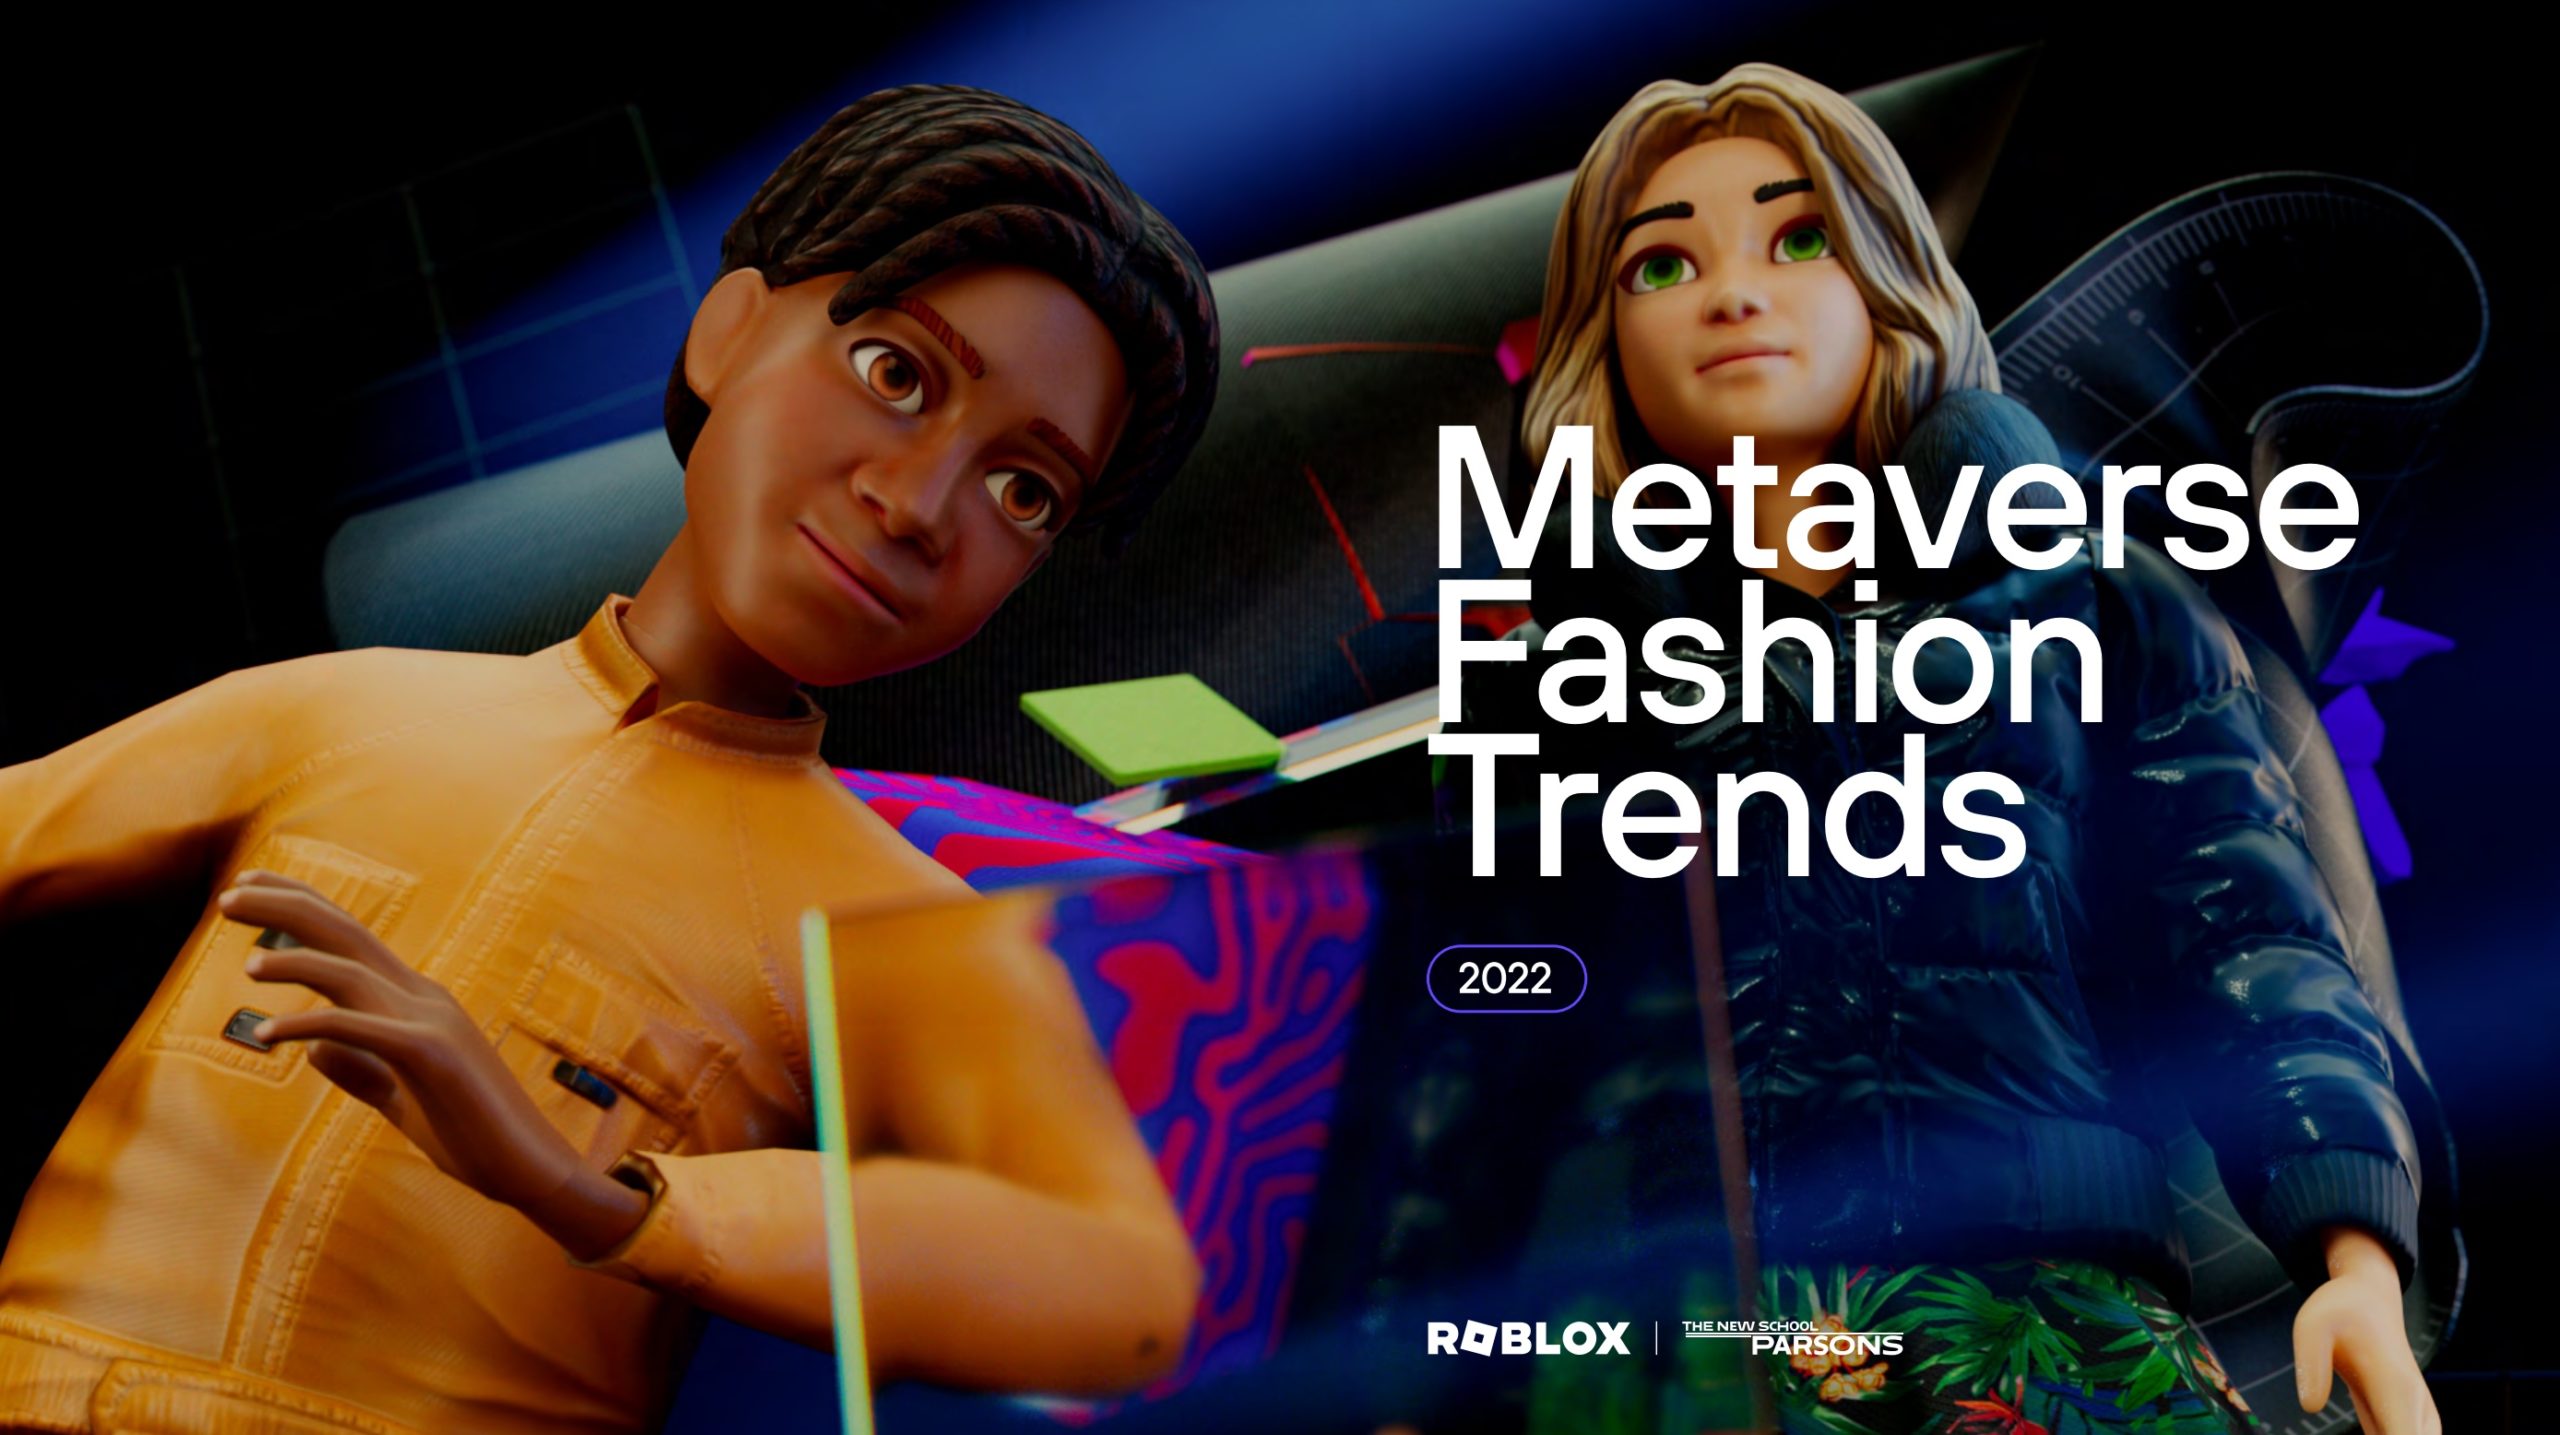 Roblox Partners With Parsons on Metaverse Curriculum, Trend Report